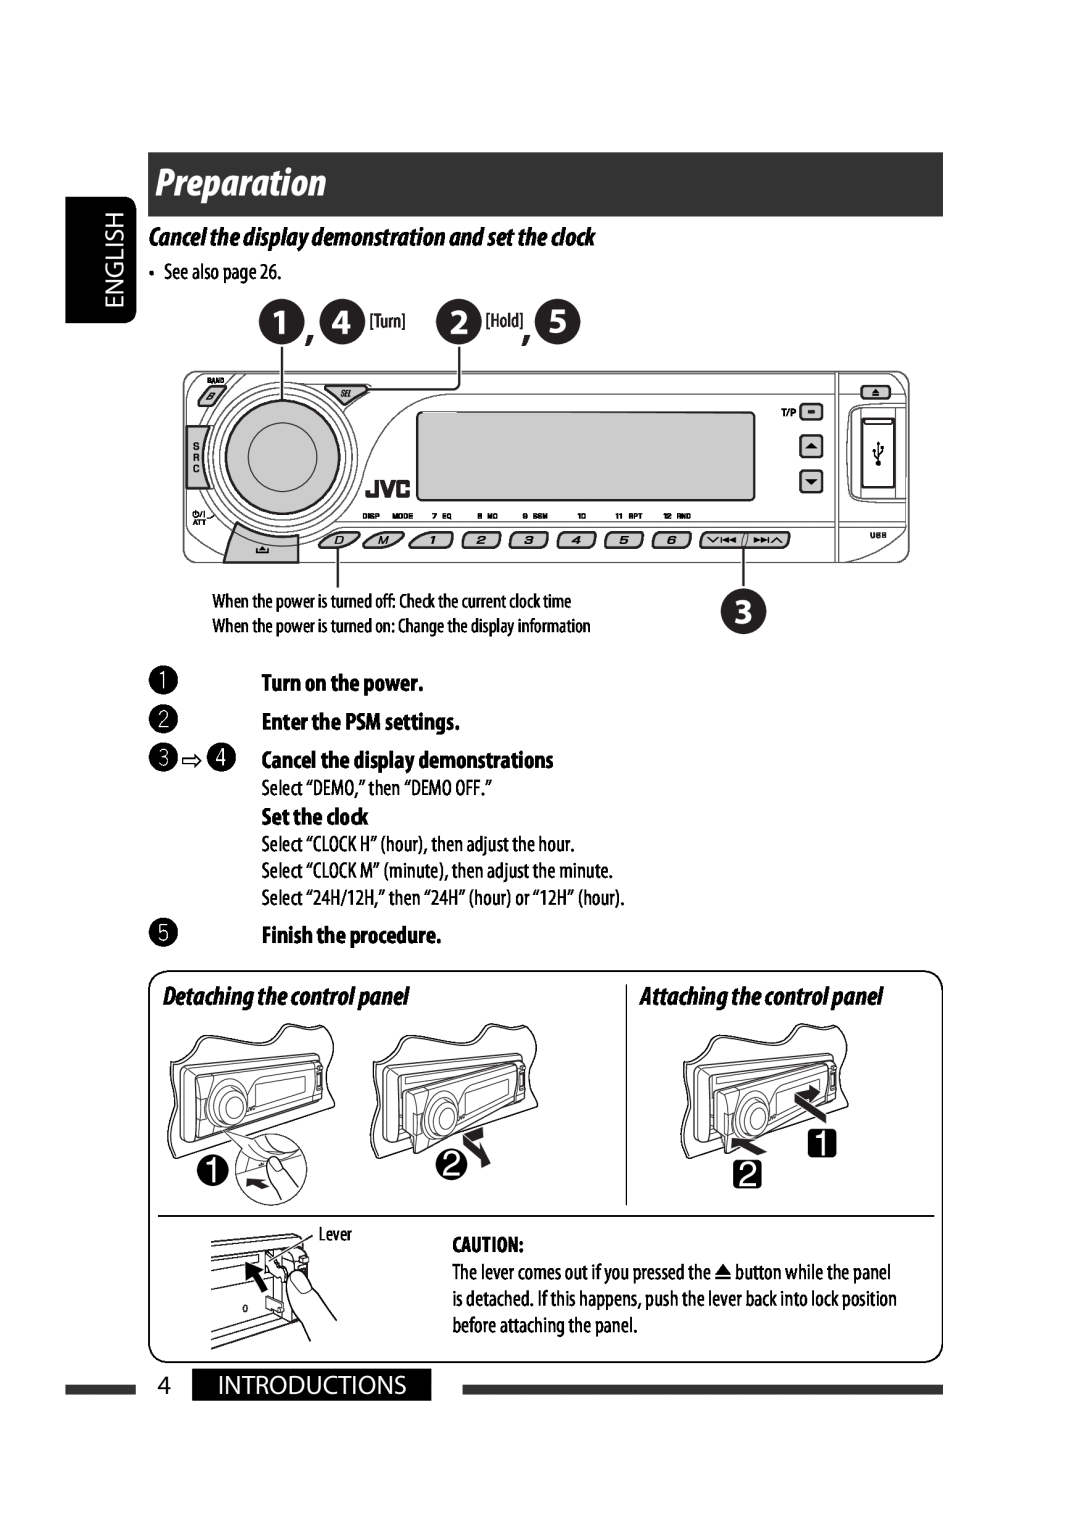 JVC KD-G731 Preparation, Detaching the control panel, 4INTRODUCTIONS, ~Turn on the power ŸEnter the PSM settings, English 